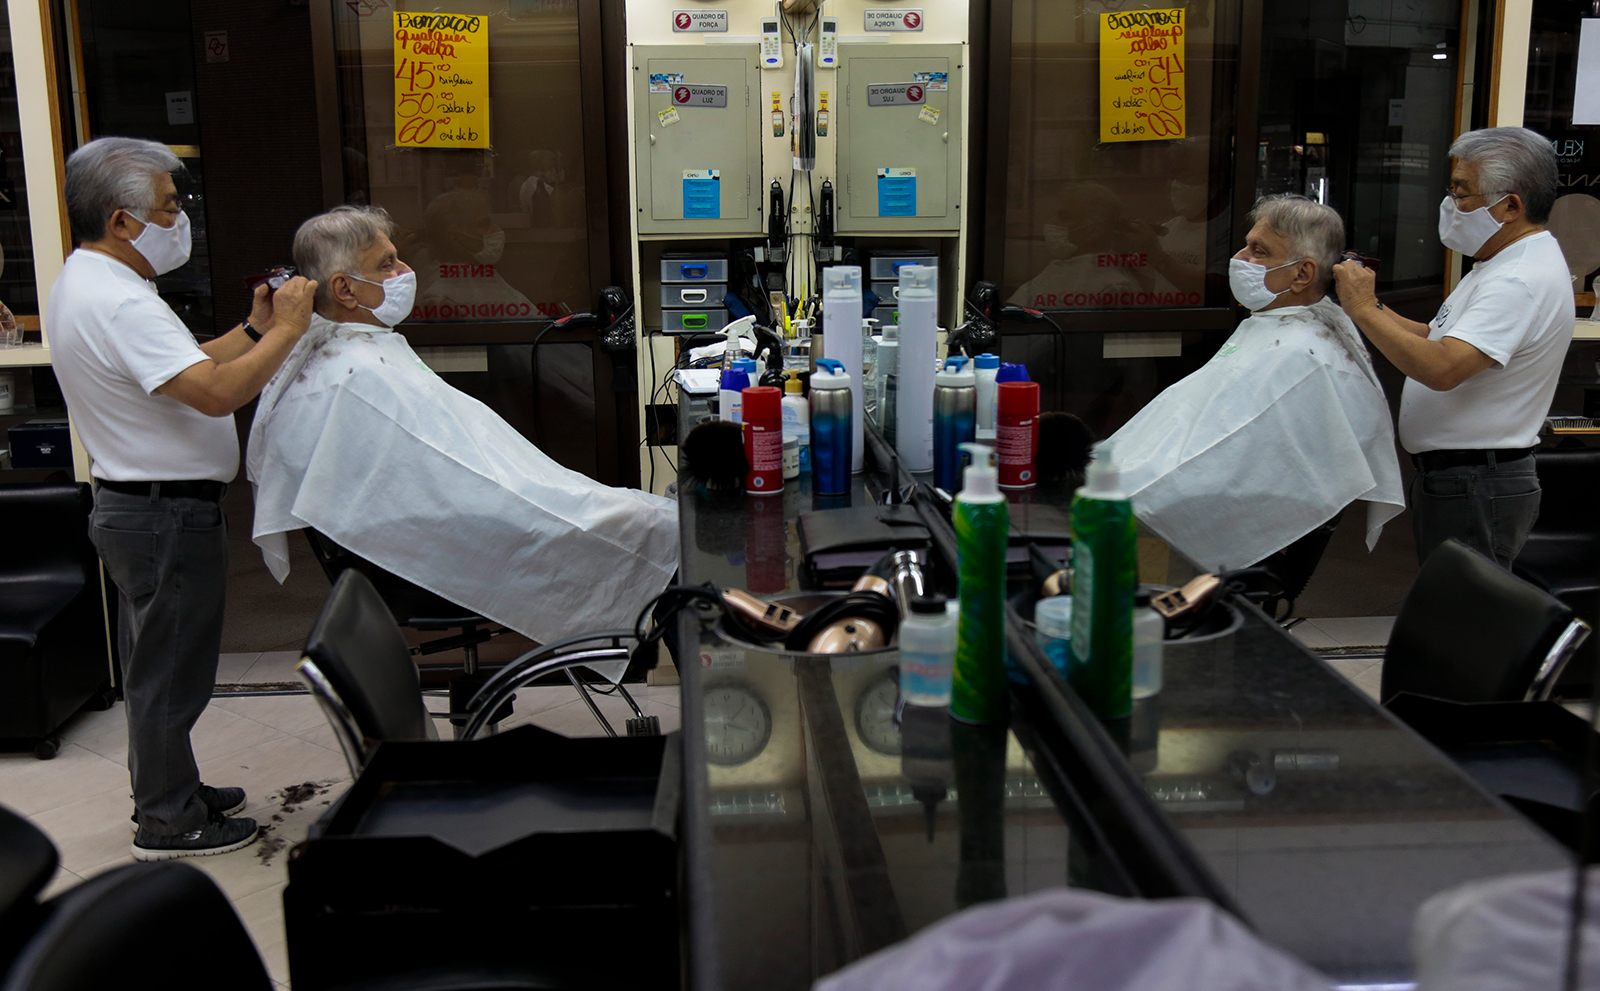 A hairdresser works on a customer after reopening amid the easing of quarantine measures on July 6, in Sao Paulo, Brazil.